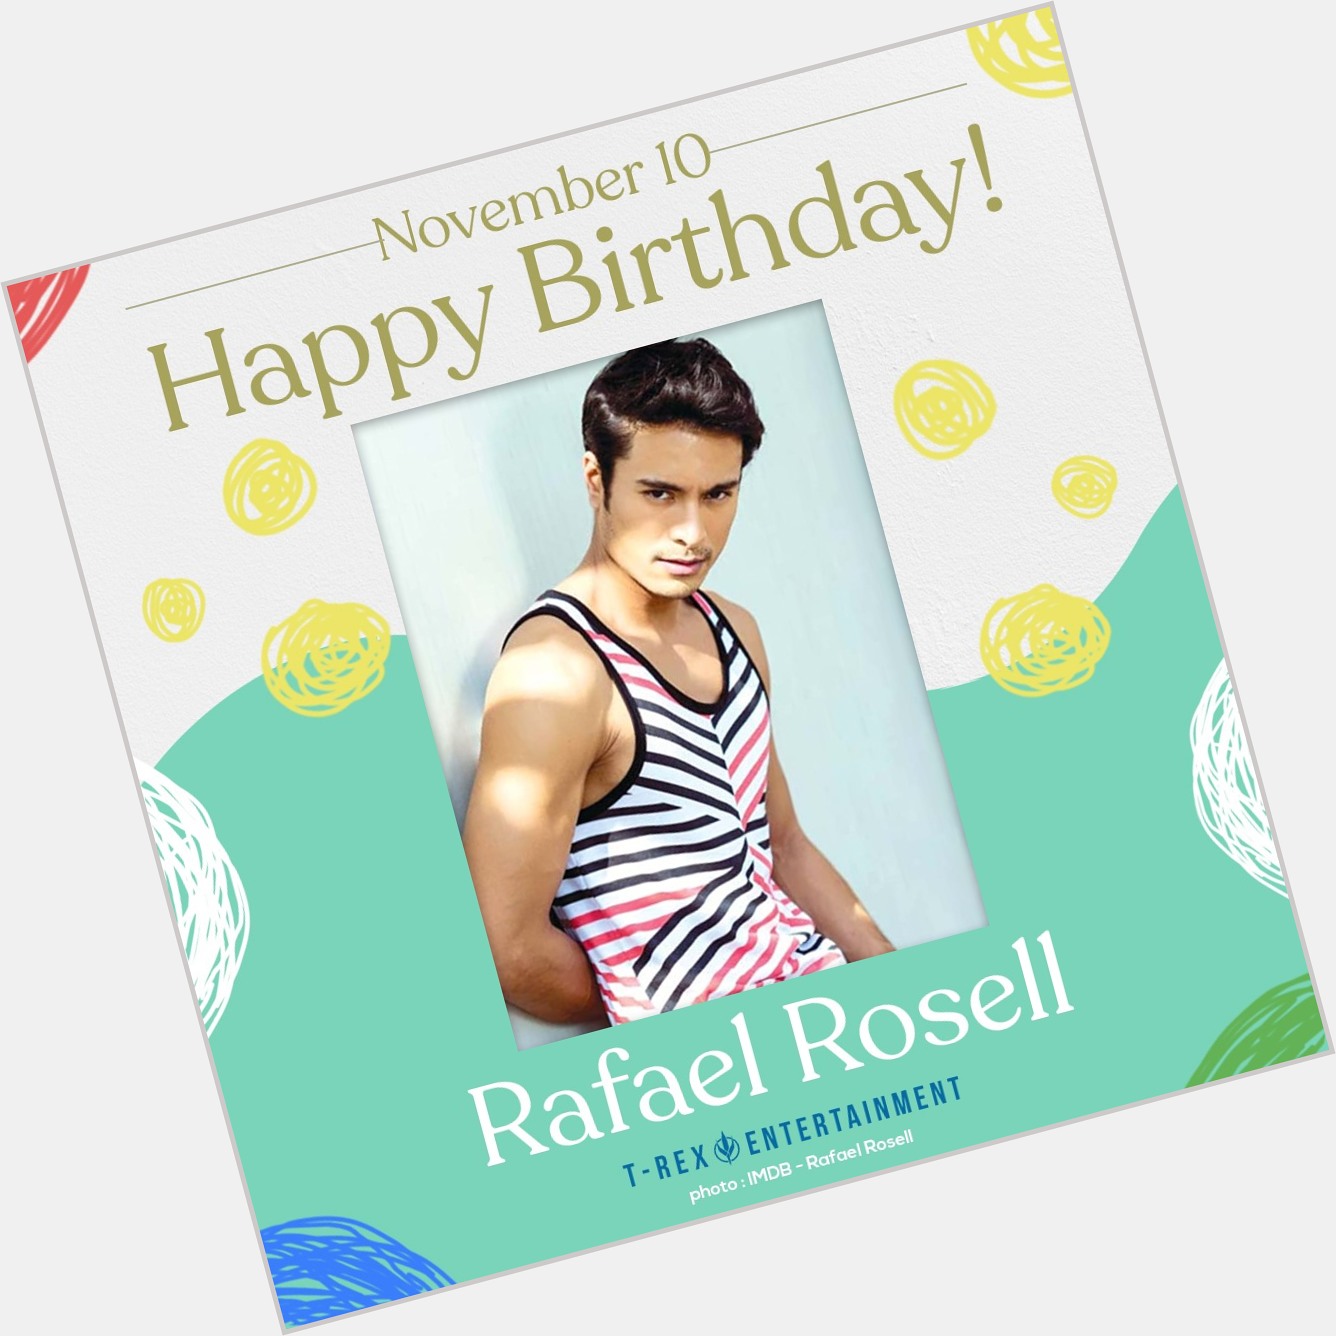 Happy 38th birthday to you, Rafael Rosell!

Wishing you the best in life and career. 